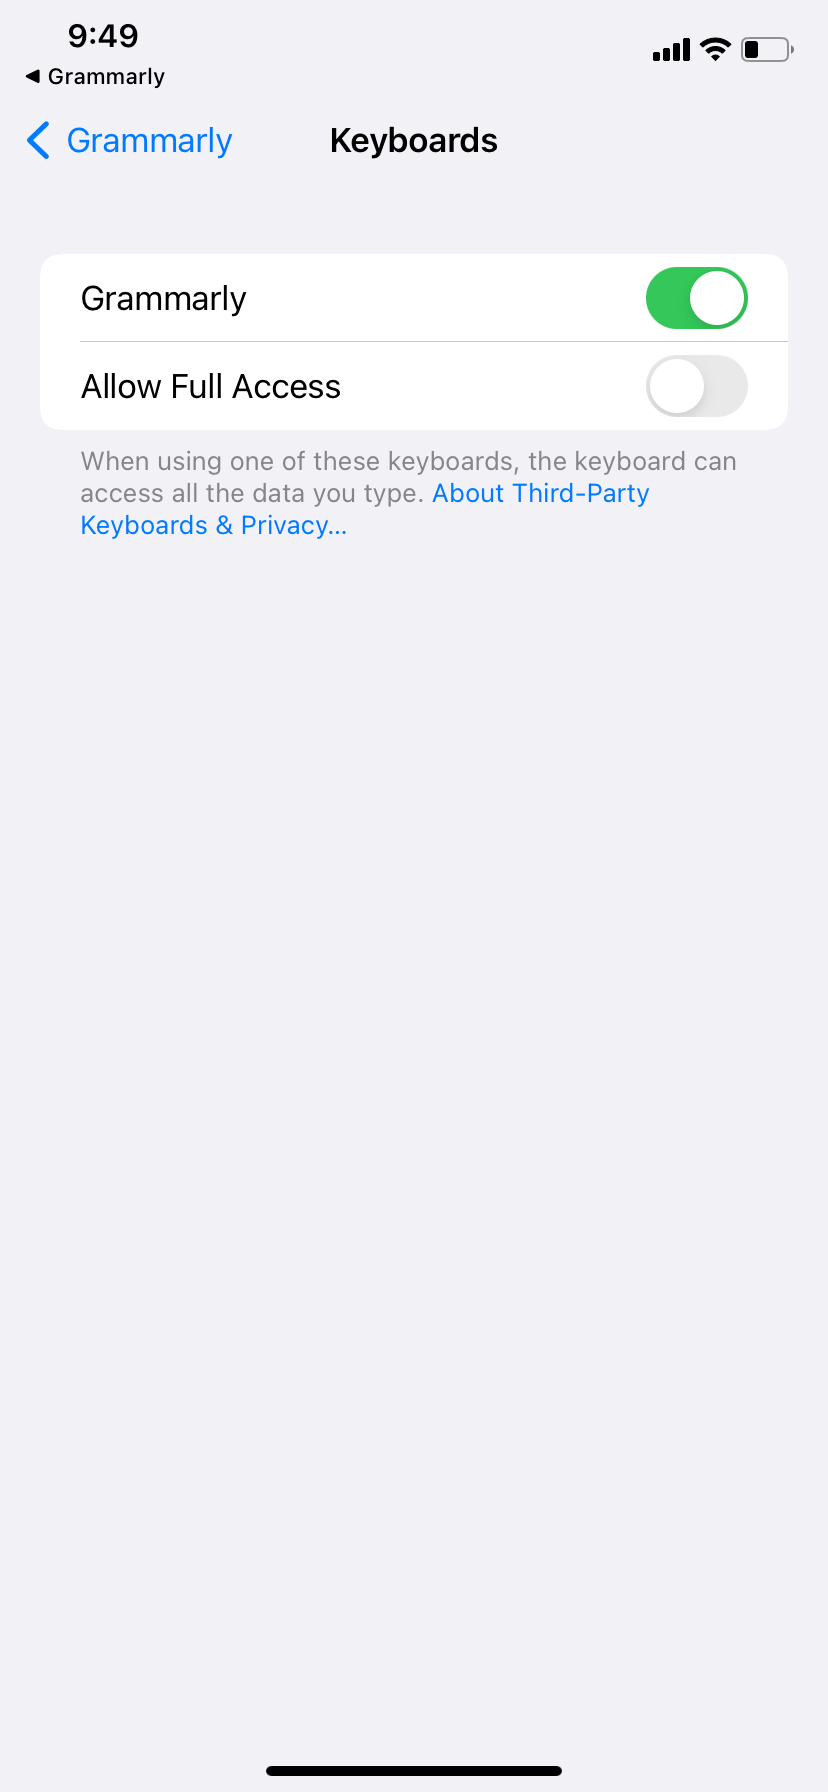 Image shows the GRammarly settings inside iPhone